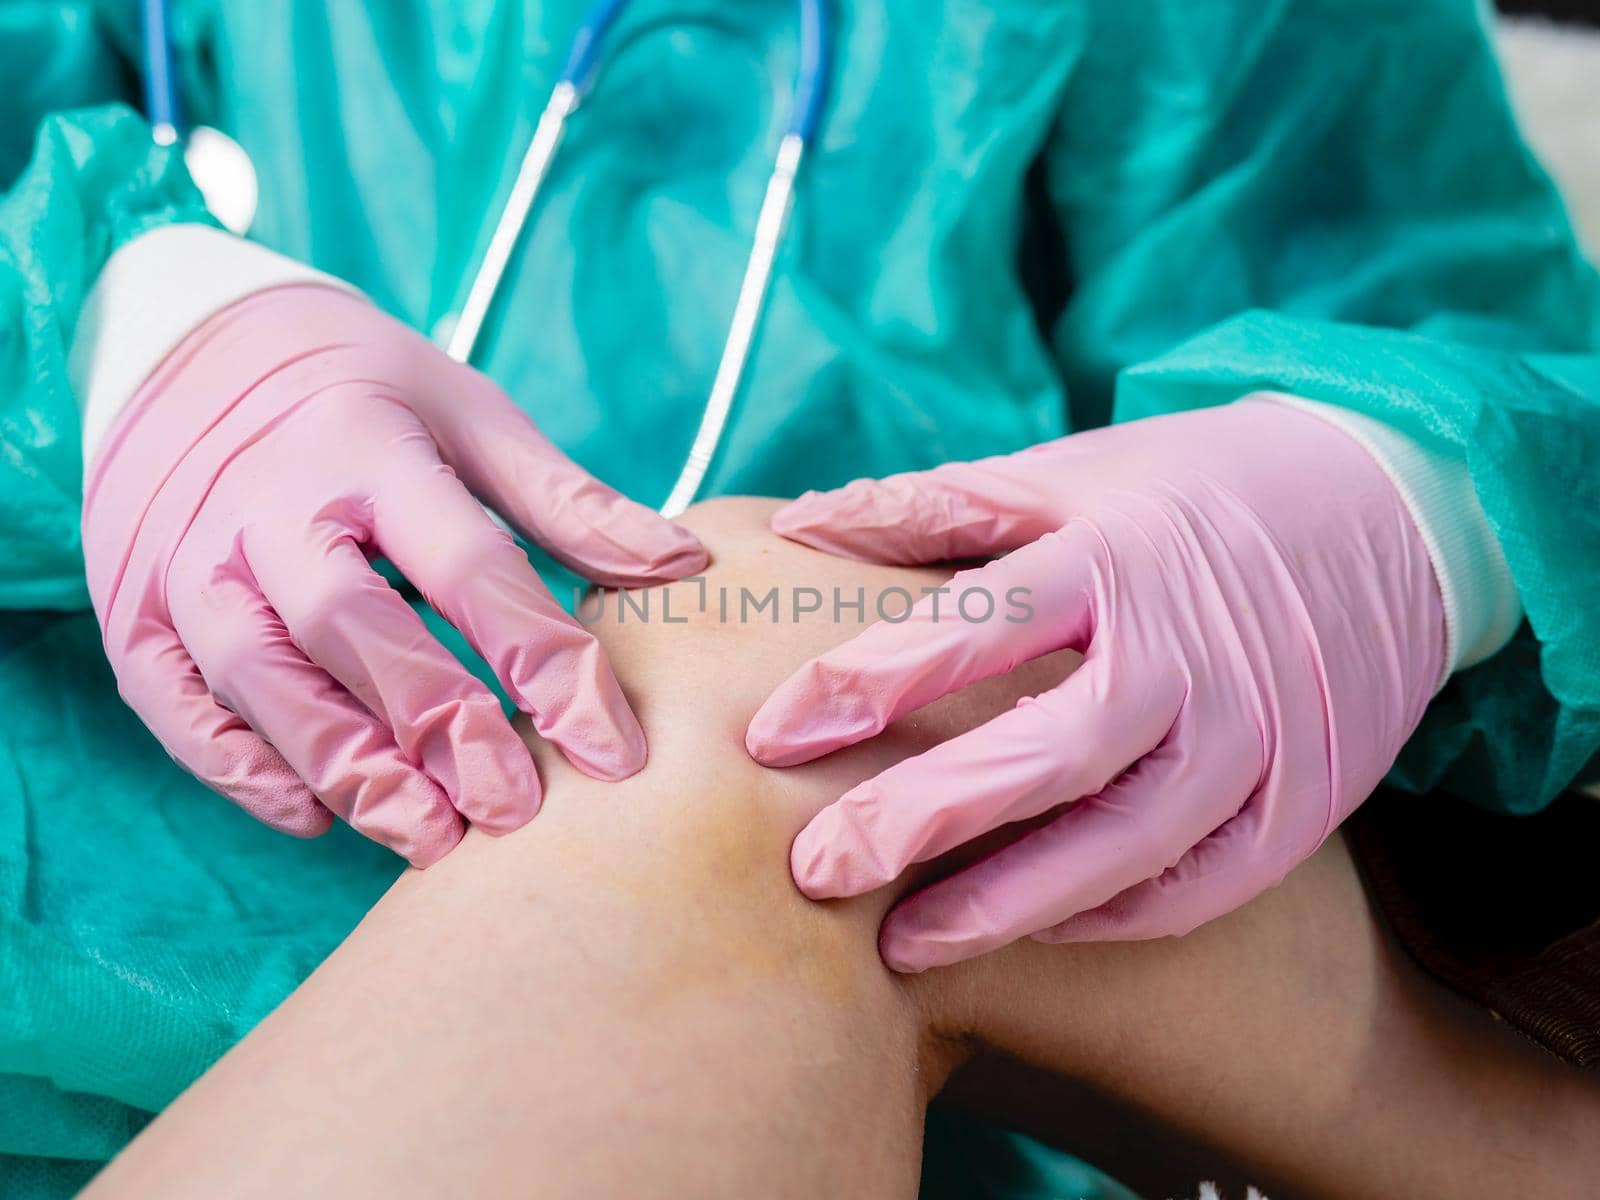 A traumatologist wearing medical gloves palpates the injured knee during a routine examination of the patient. by Utlanov